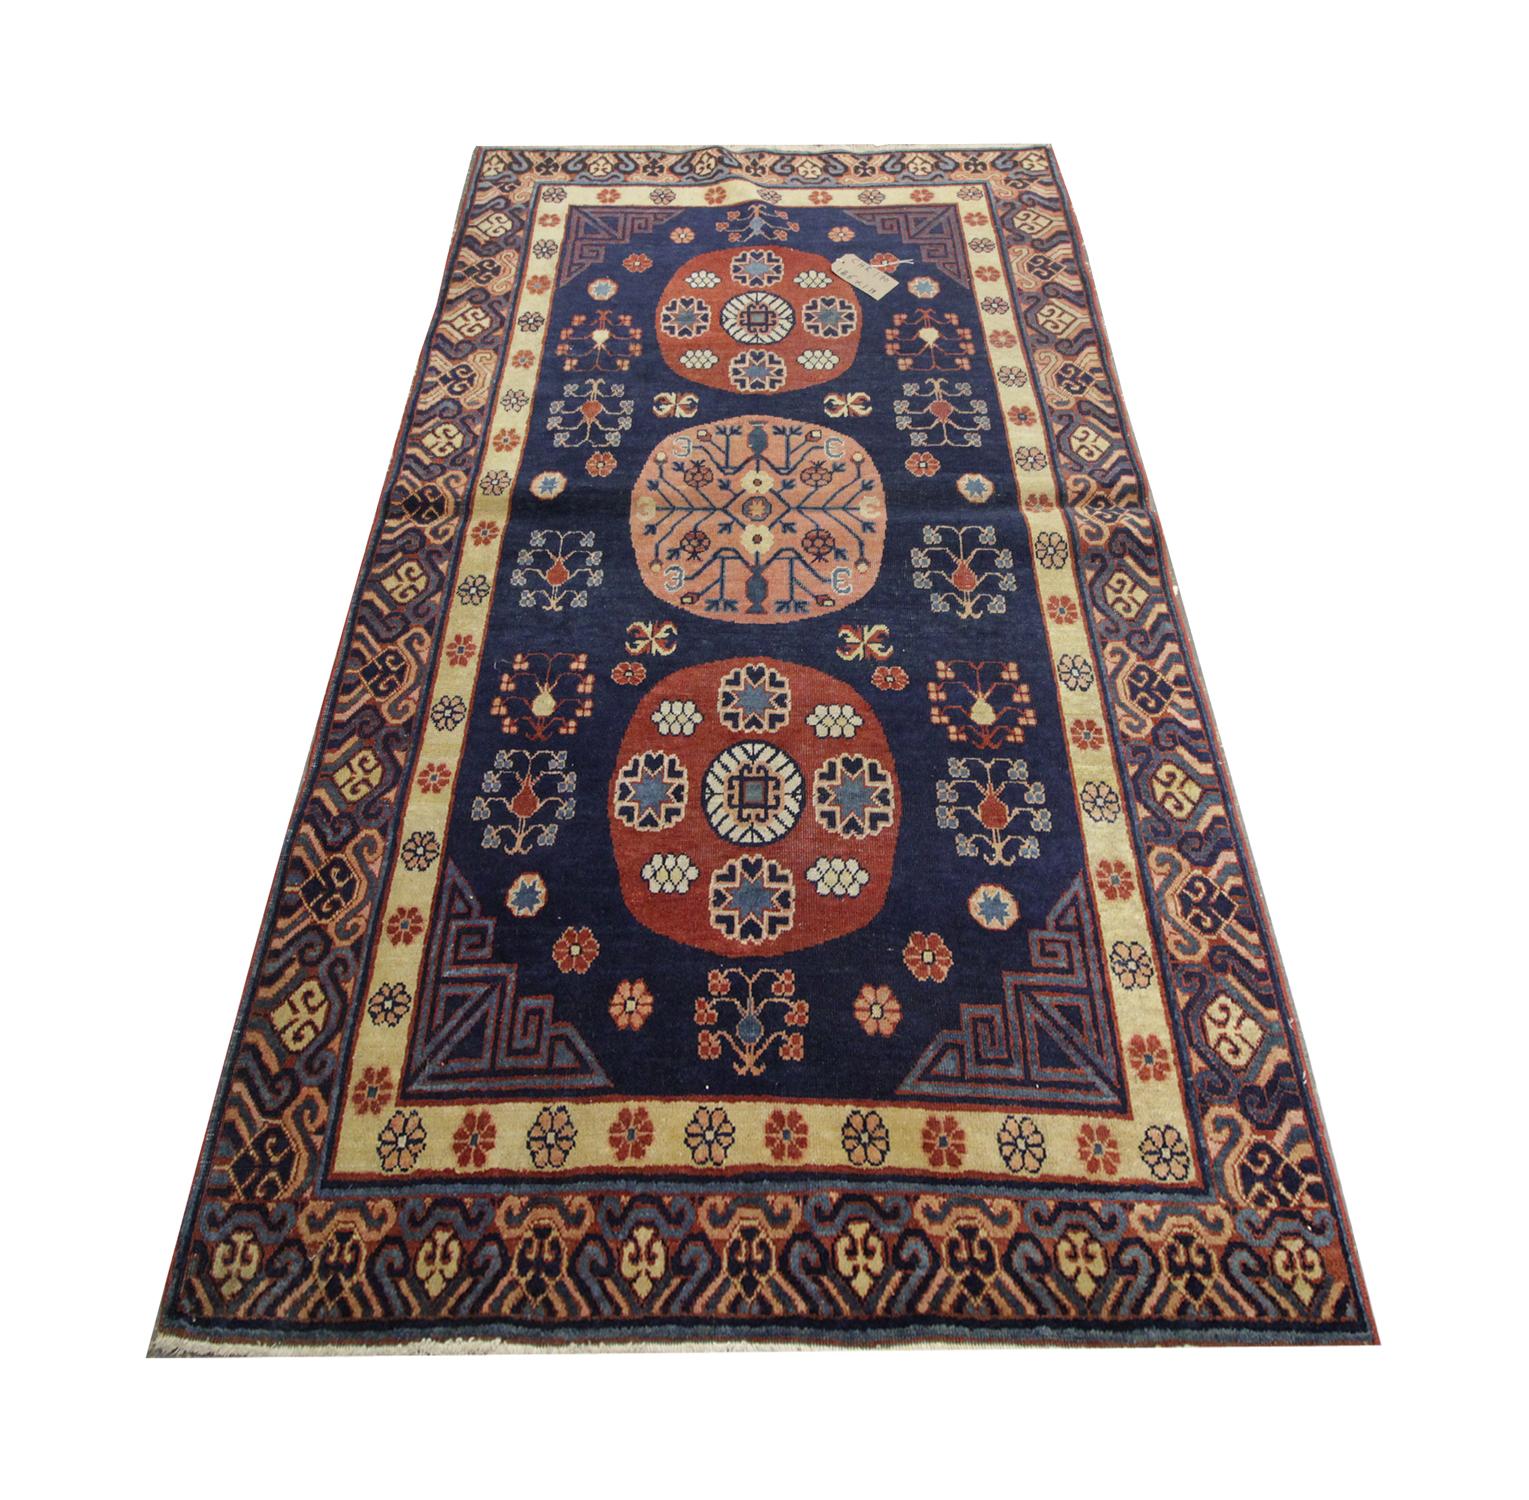 This handmade carpet Oriental rug deep blue central Asian antique rug was handwoven in Kohtan in 1989. Three circular emblems flow through the centre in red and peach, surrounded by geometric flower motifs. Enclosed by patterned corner designs and a